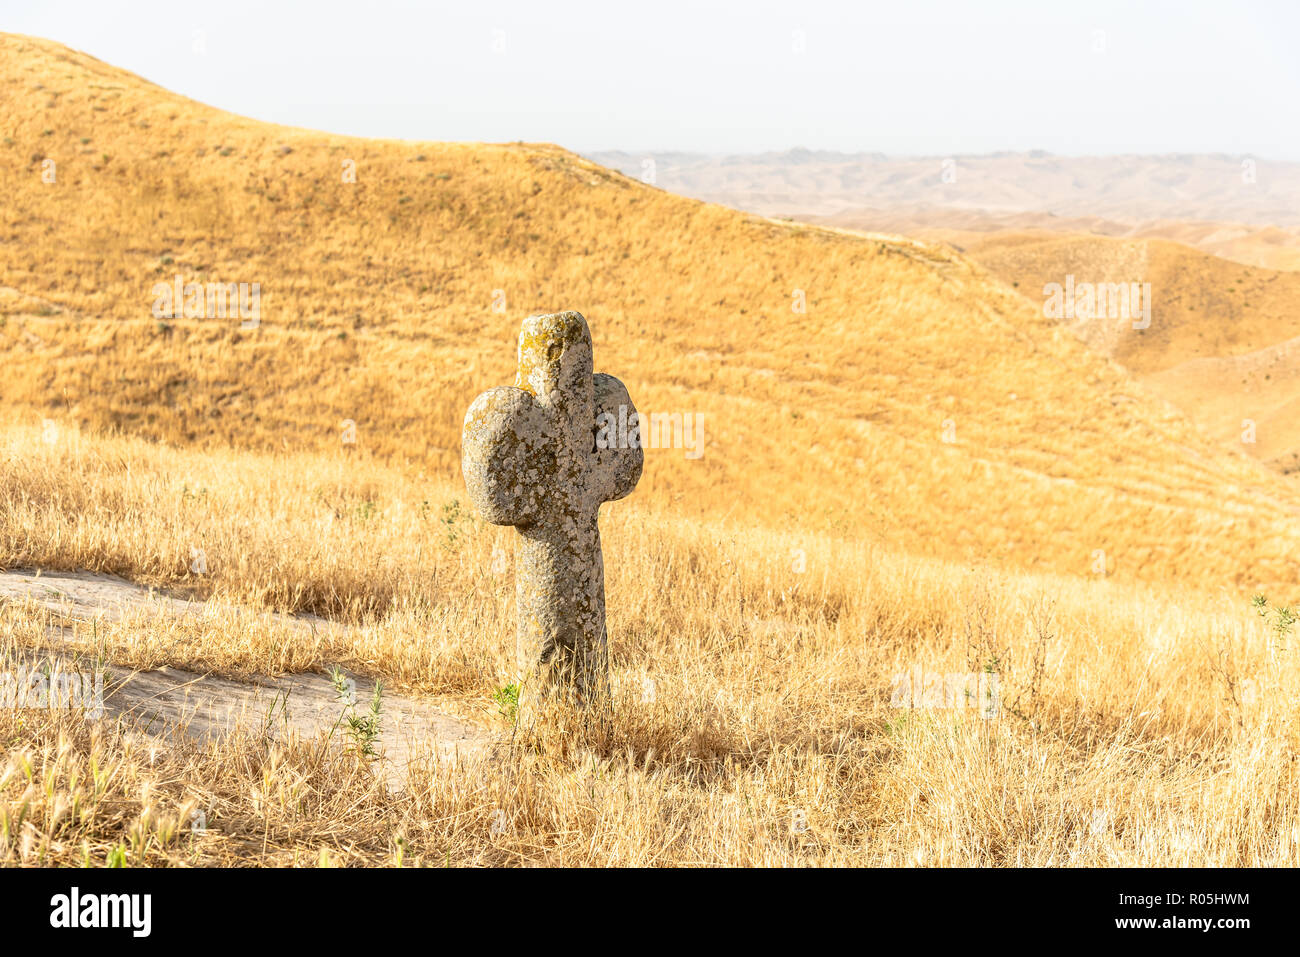 Khaled Nabi cemetery, situated in the Gokcheh Dagh hills of the Turkmen Sahra in Golestan, Northern Iran Stock Photo